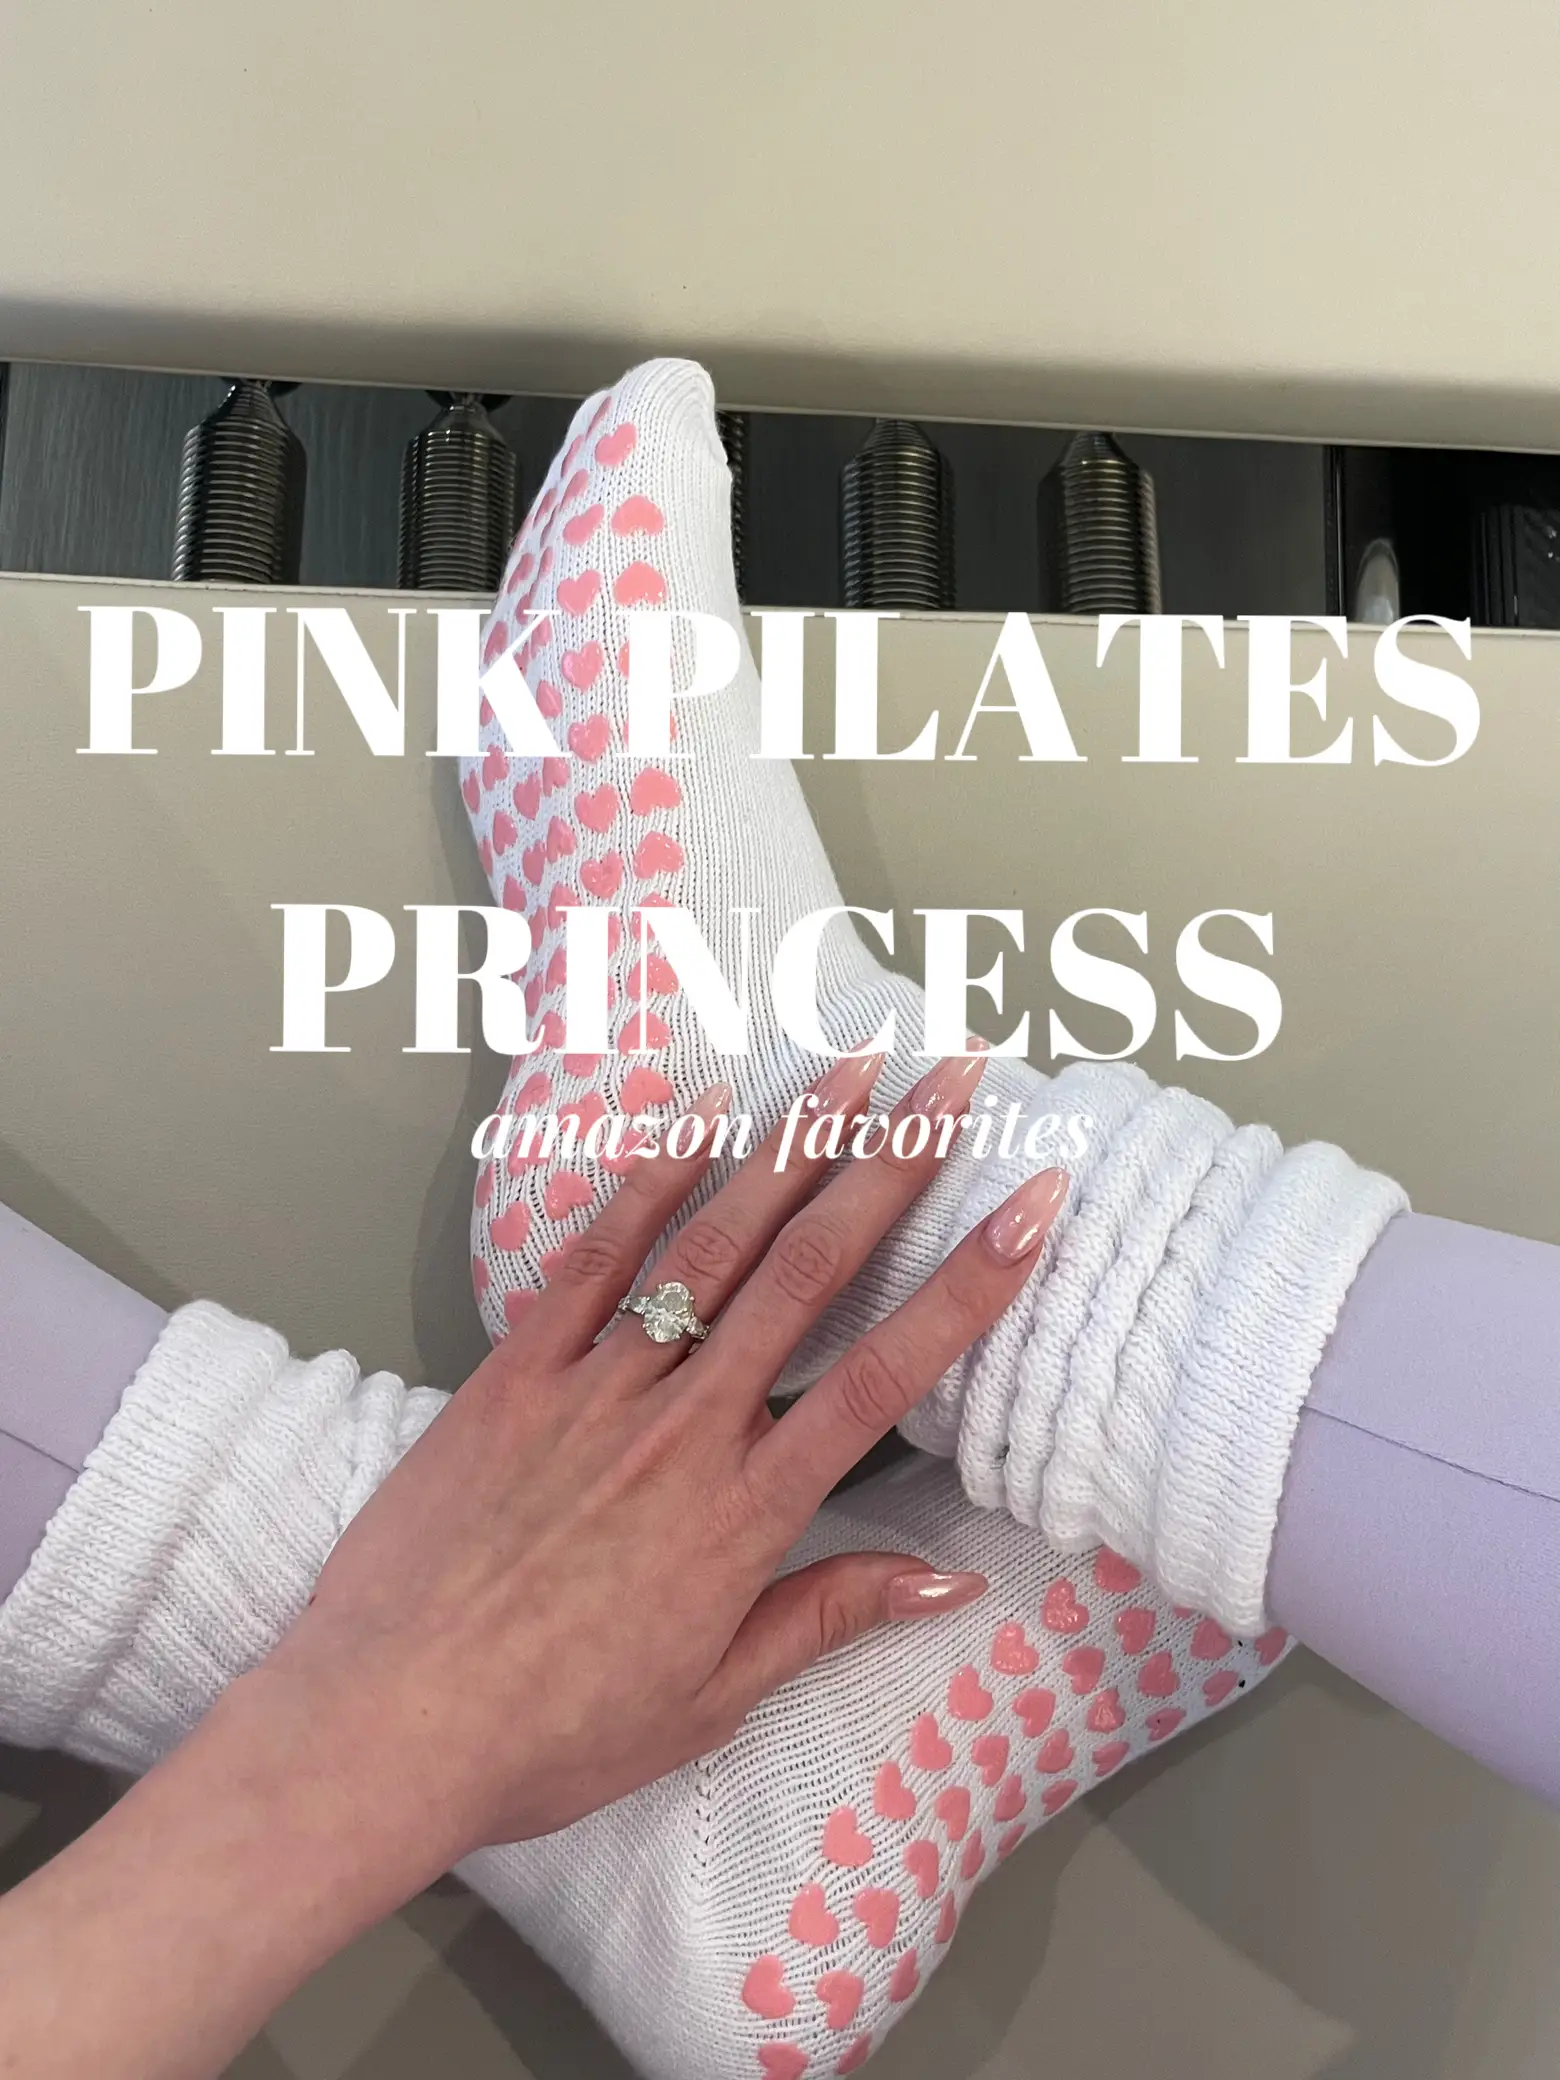 Crossover flare leggings 🤍 in my pink pilates princess era. The